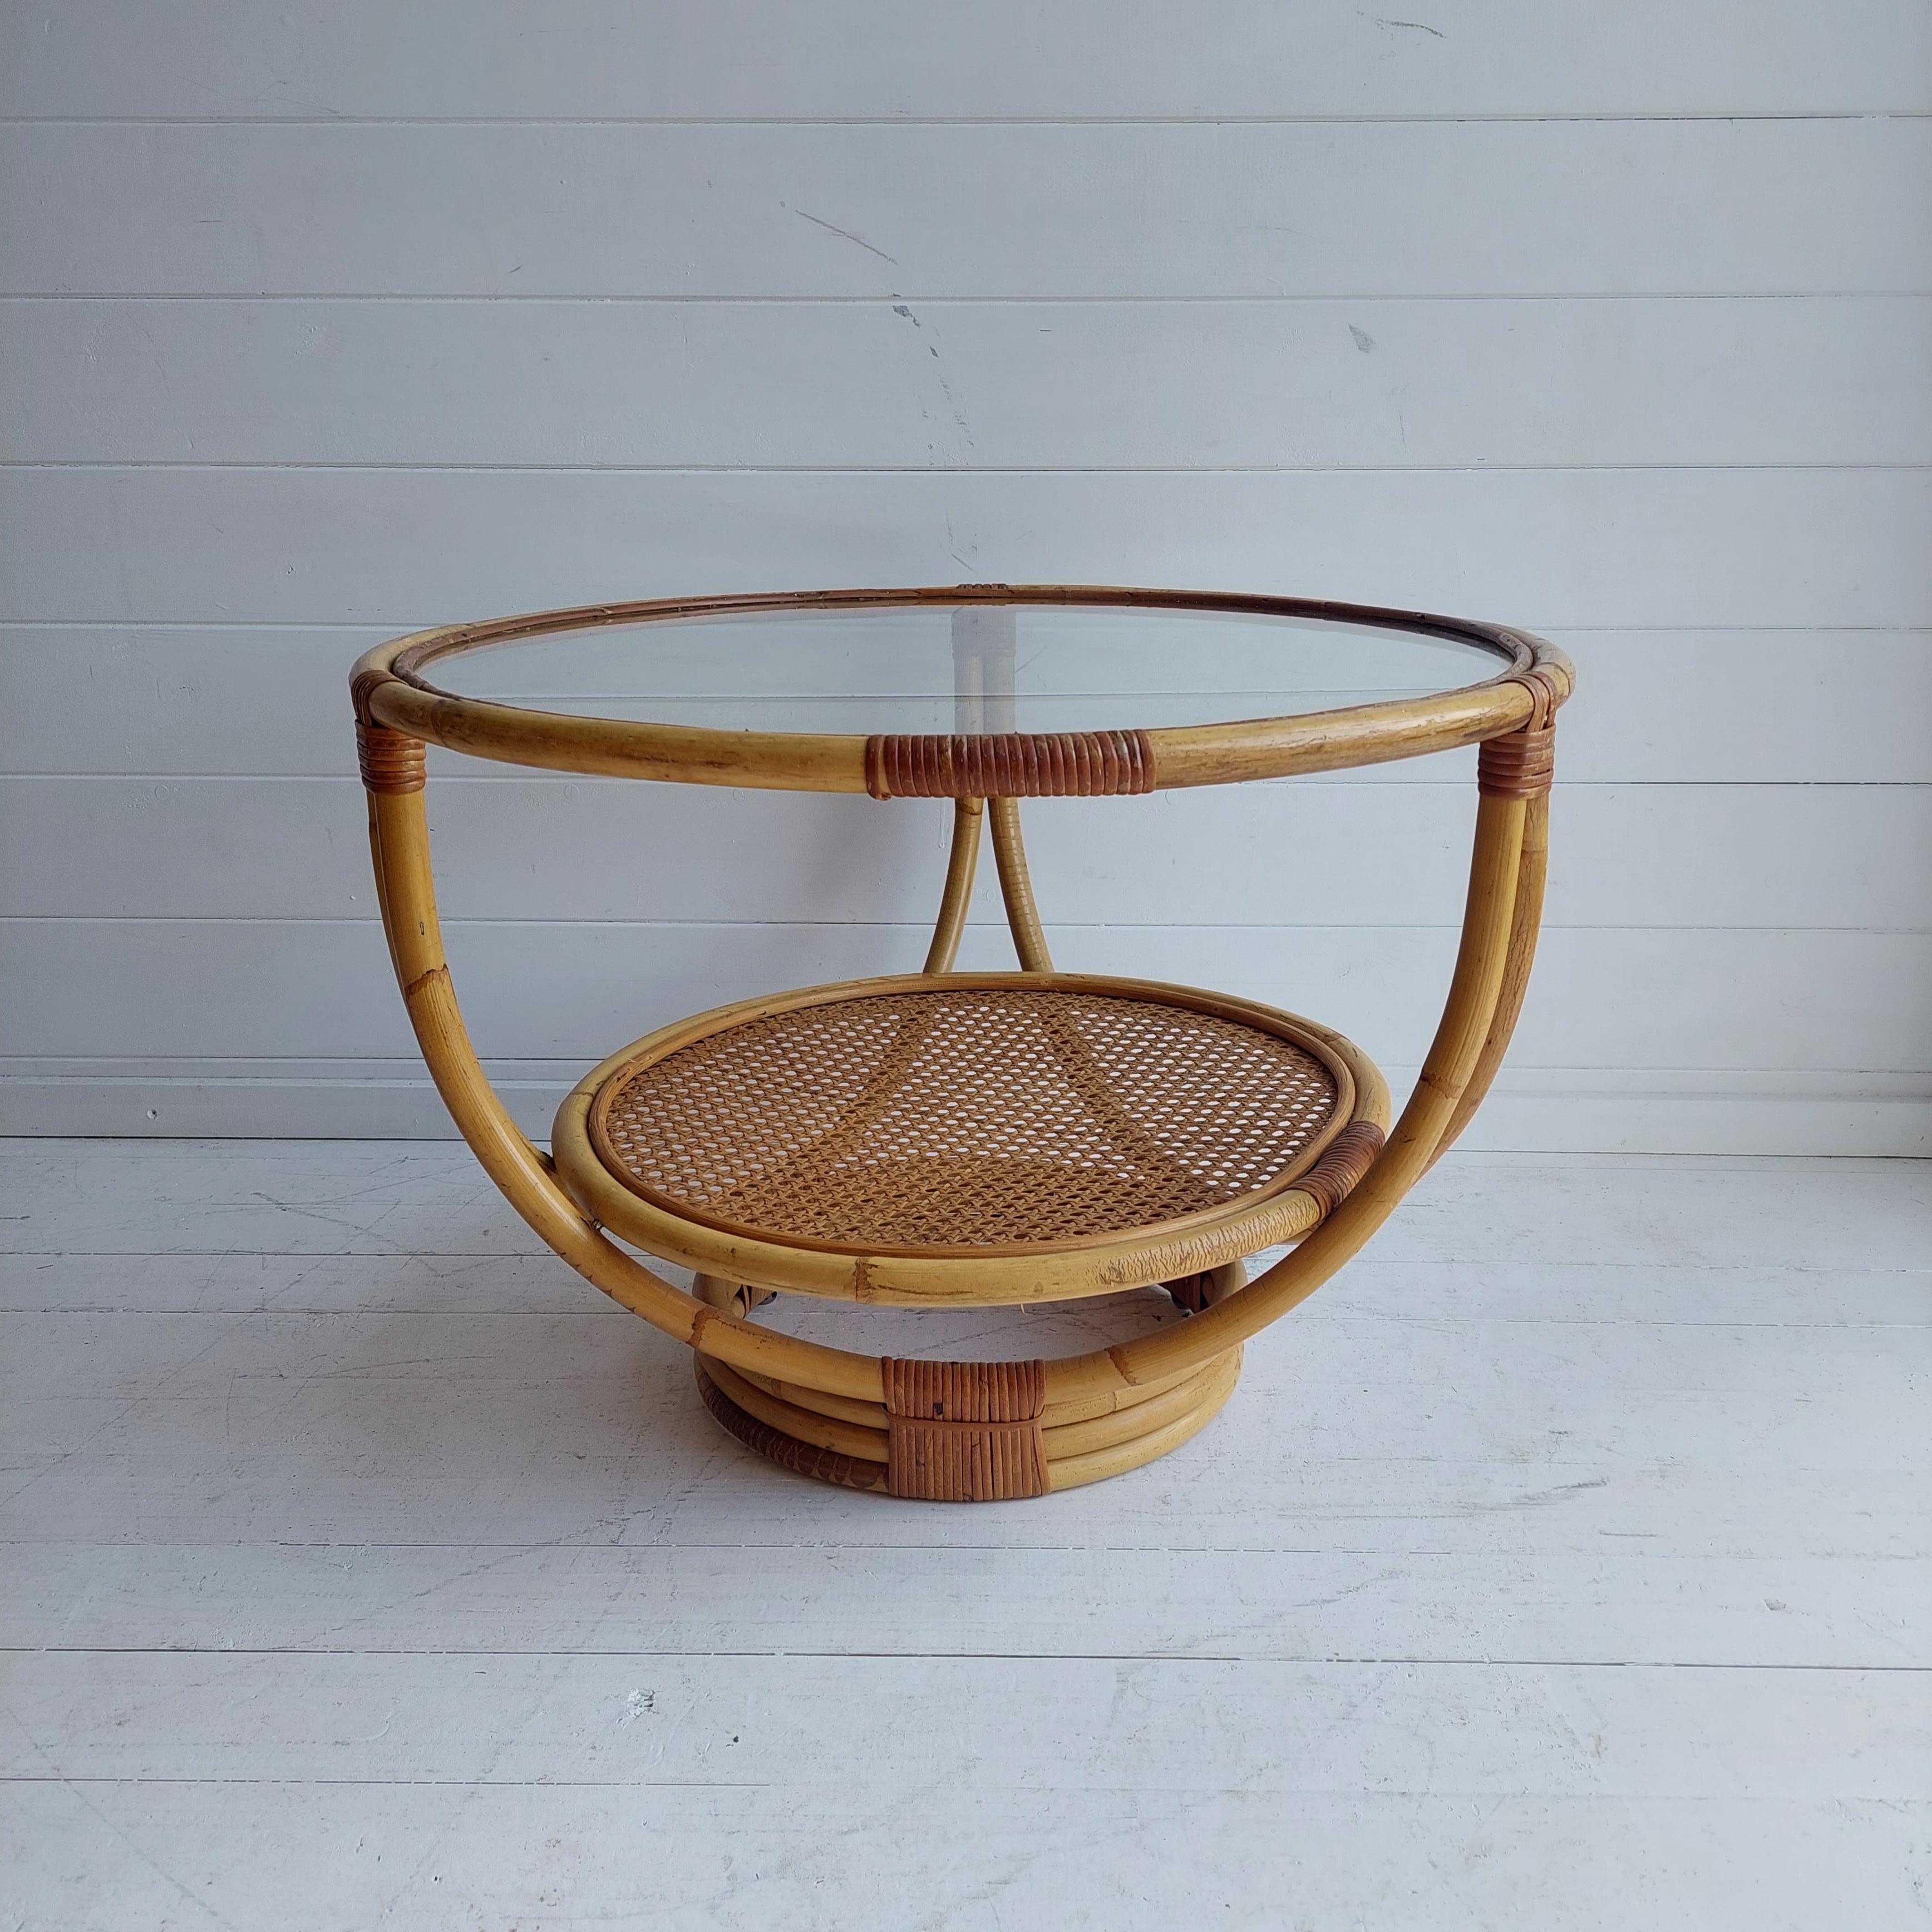 Cool vintage coffee table
This is a rare find!
This beautiful circular glass top table is both stylish & functional. 
It has a cane topped lower shelf which adds to its Mid-Century vibe.

The table has an iconic mid-century design echoing the